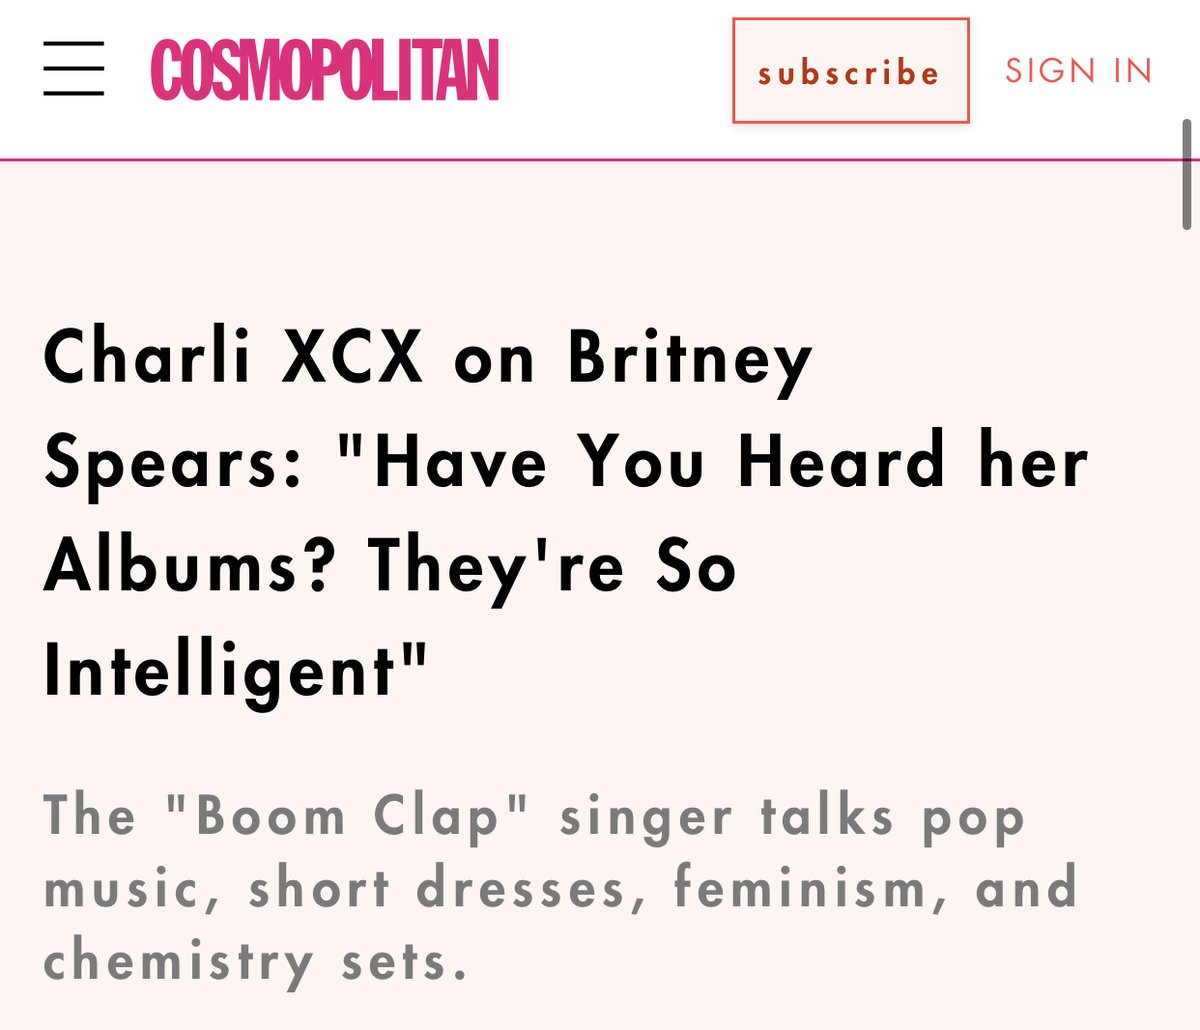 Charli XCX has called Britney a "pop genius" and a "huge inspiration" to her. Additionally, she has praised Britney's albums for being "inteligent" and "ahead of their time."